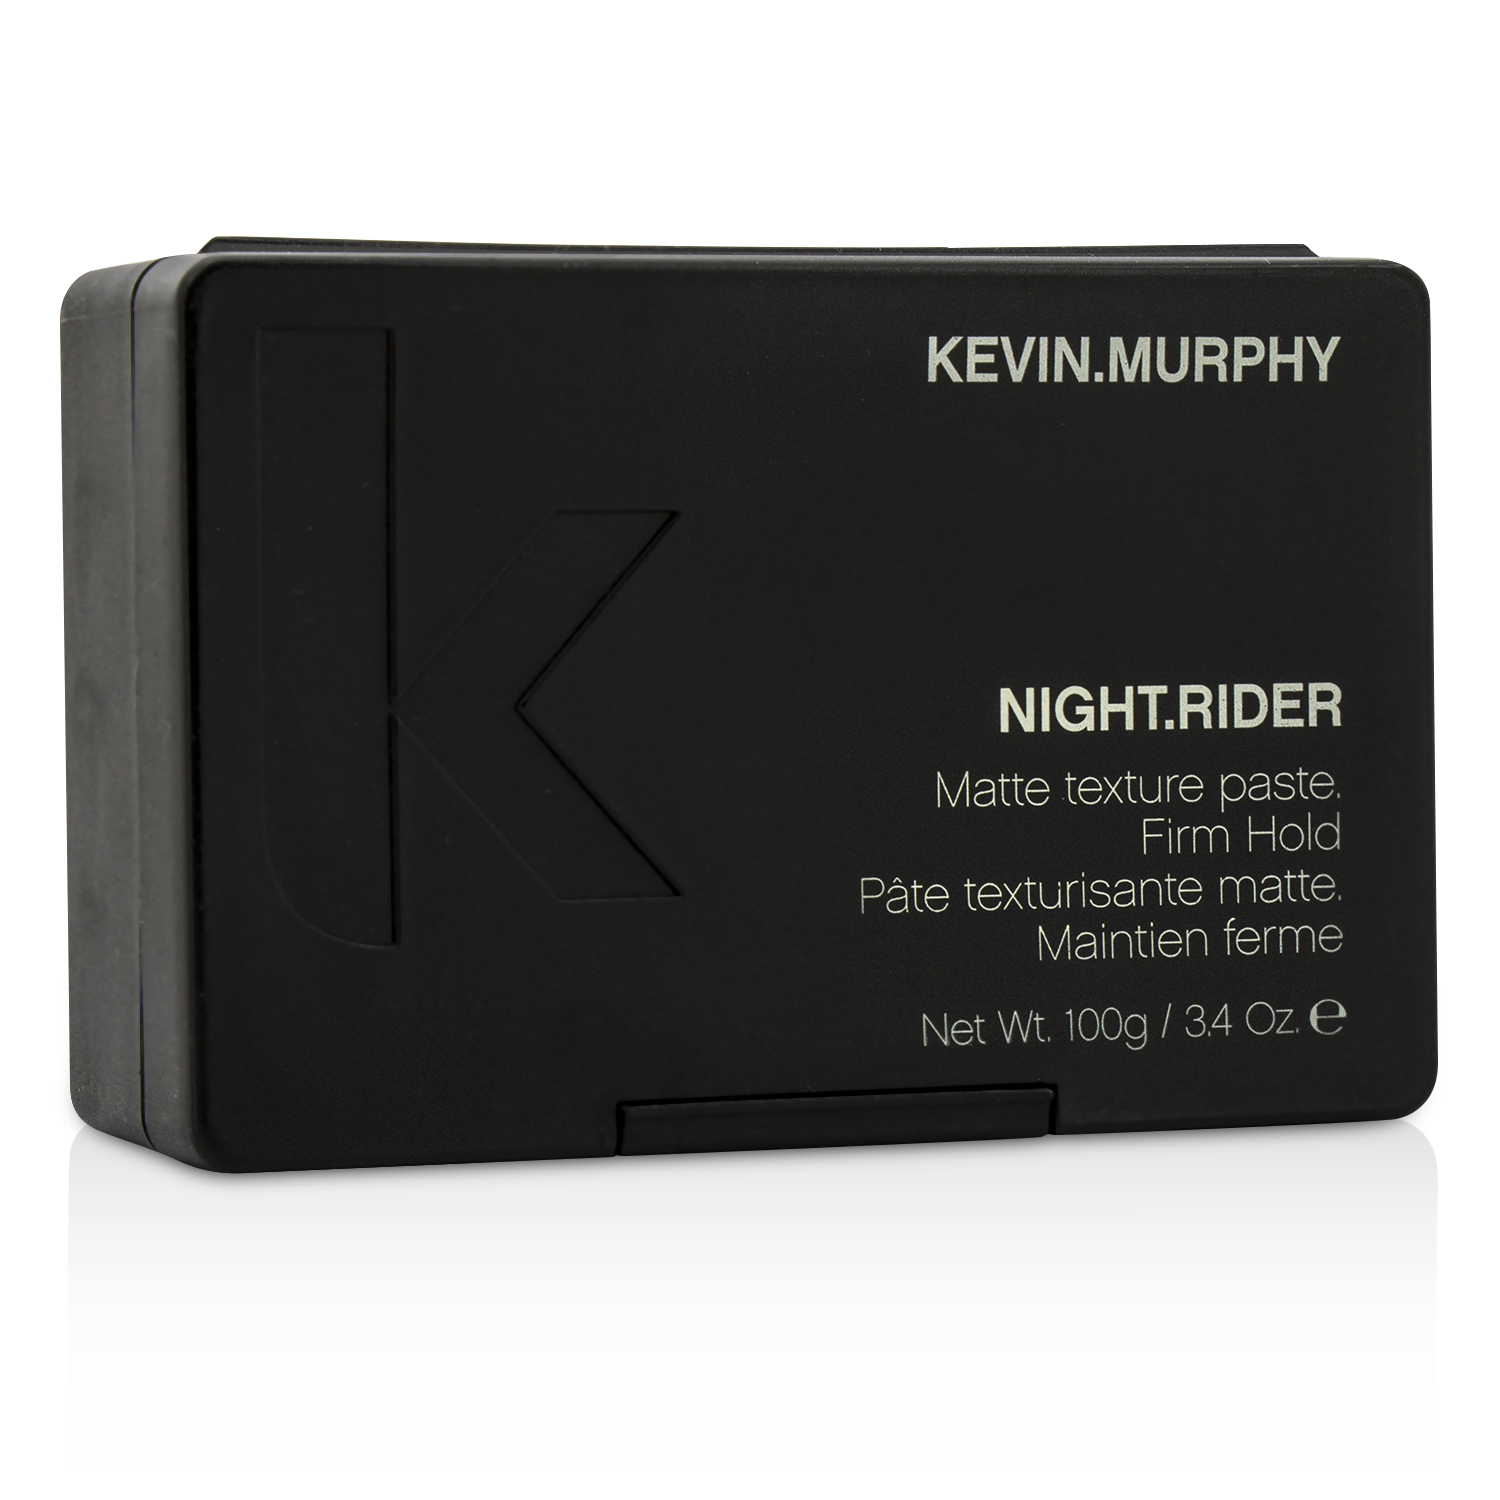 Night.Rider Matte Texture Paste (Firm Hold) Kevin.Murphy Image